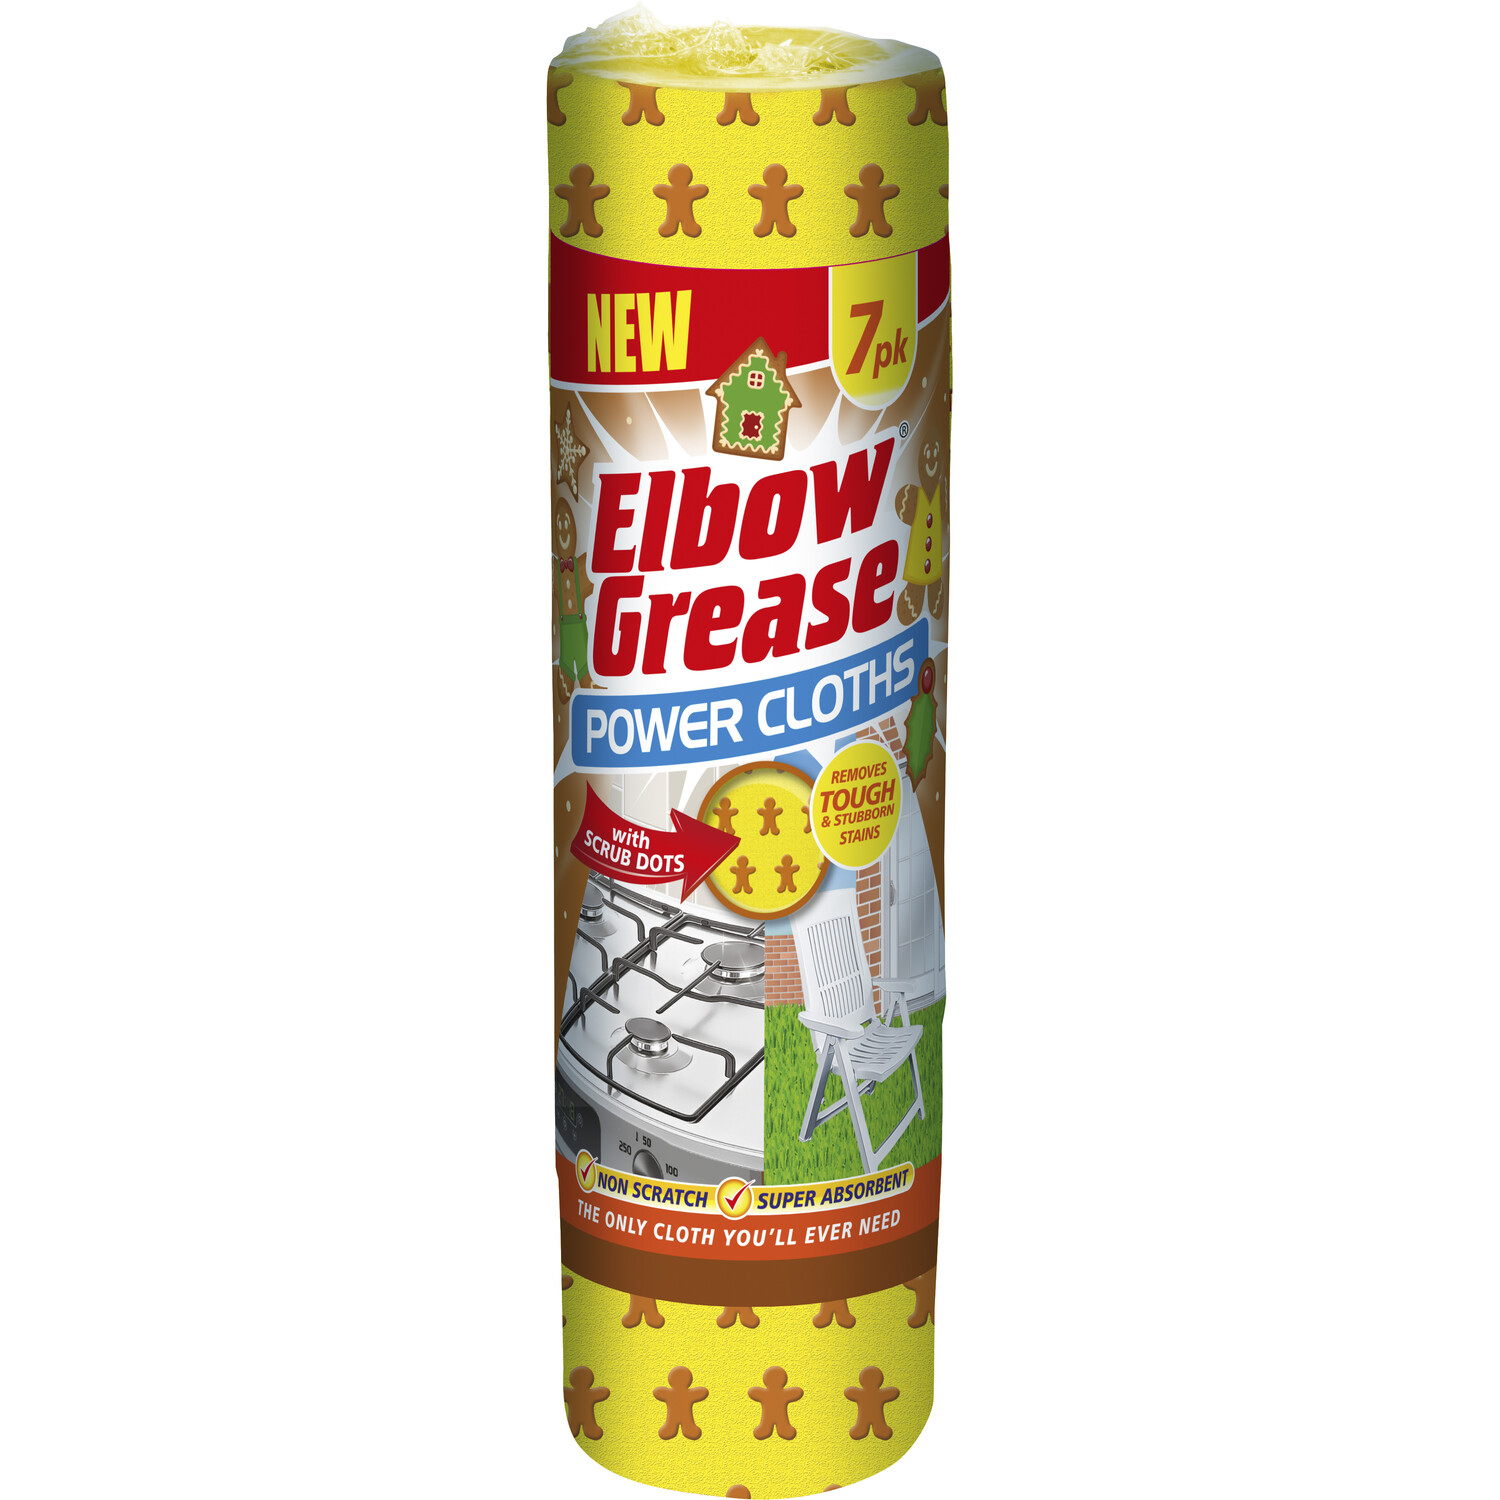 Pack of 7 Elbow Grease Gingerbread Power Cloths - Yellow Image